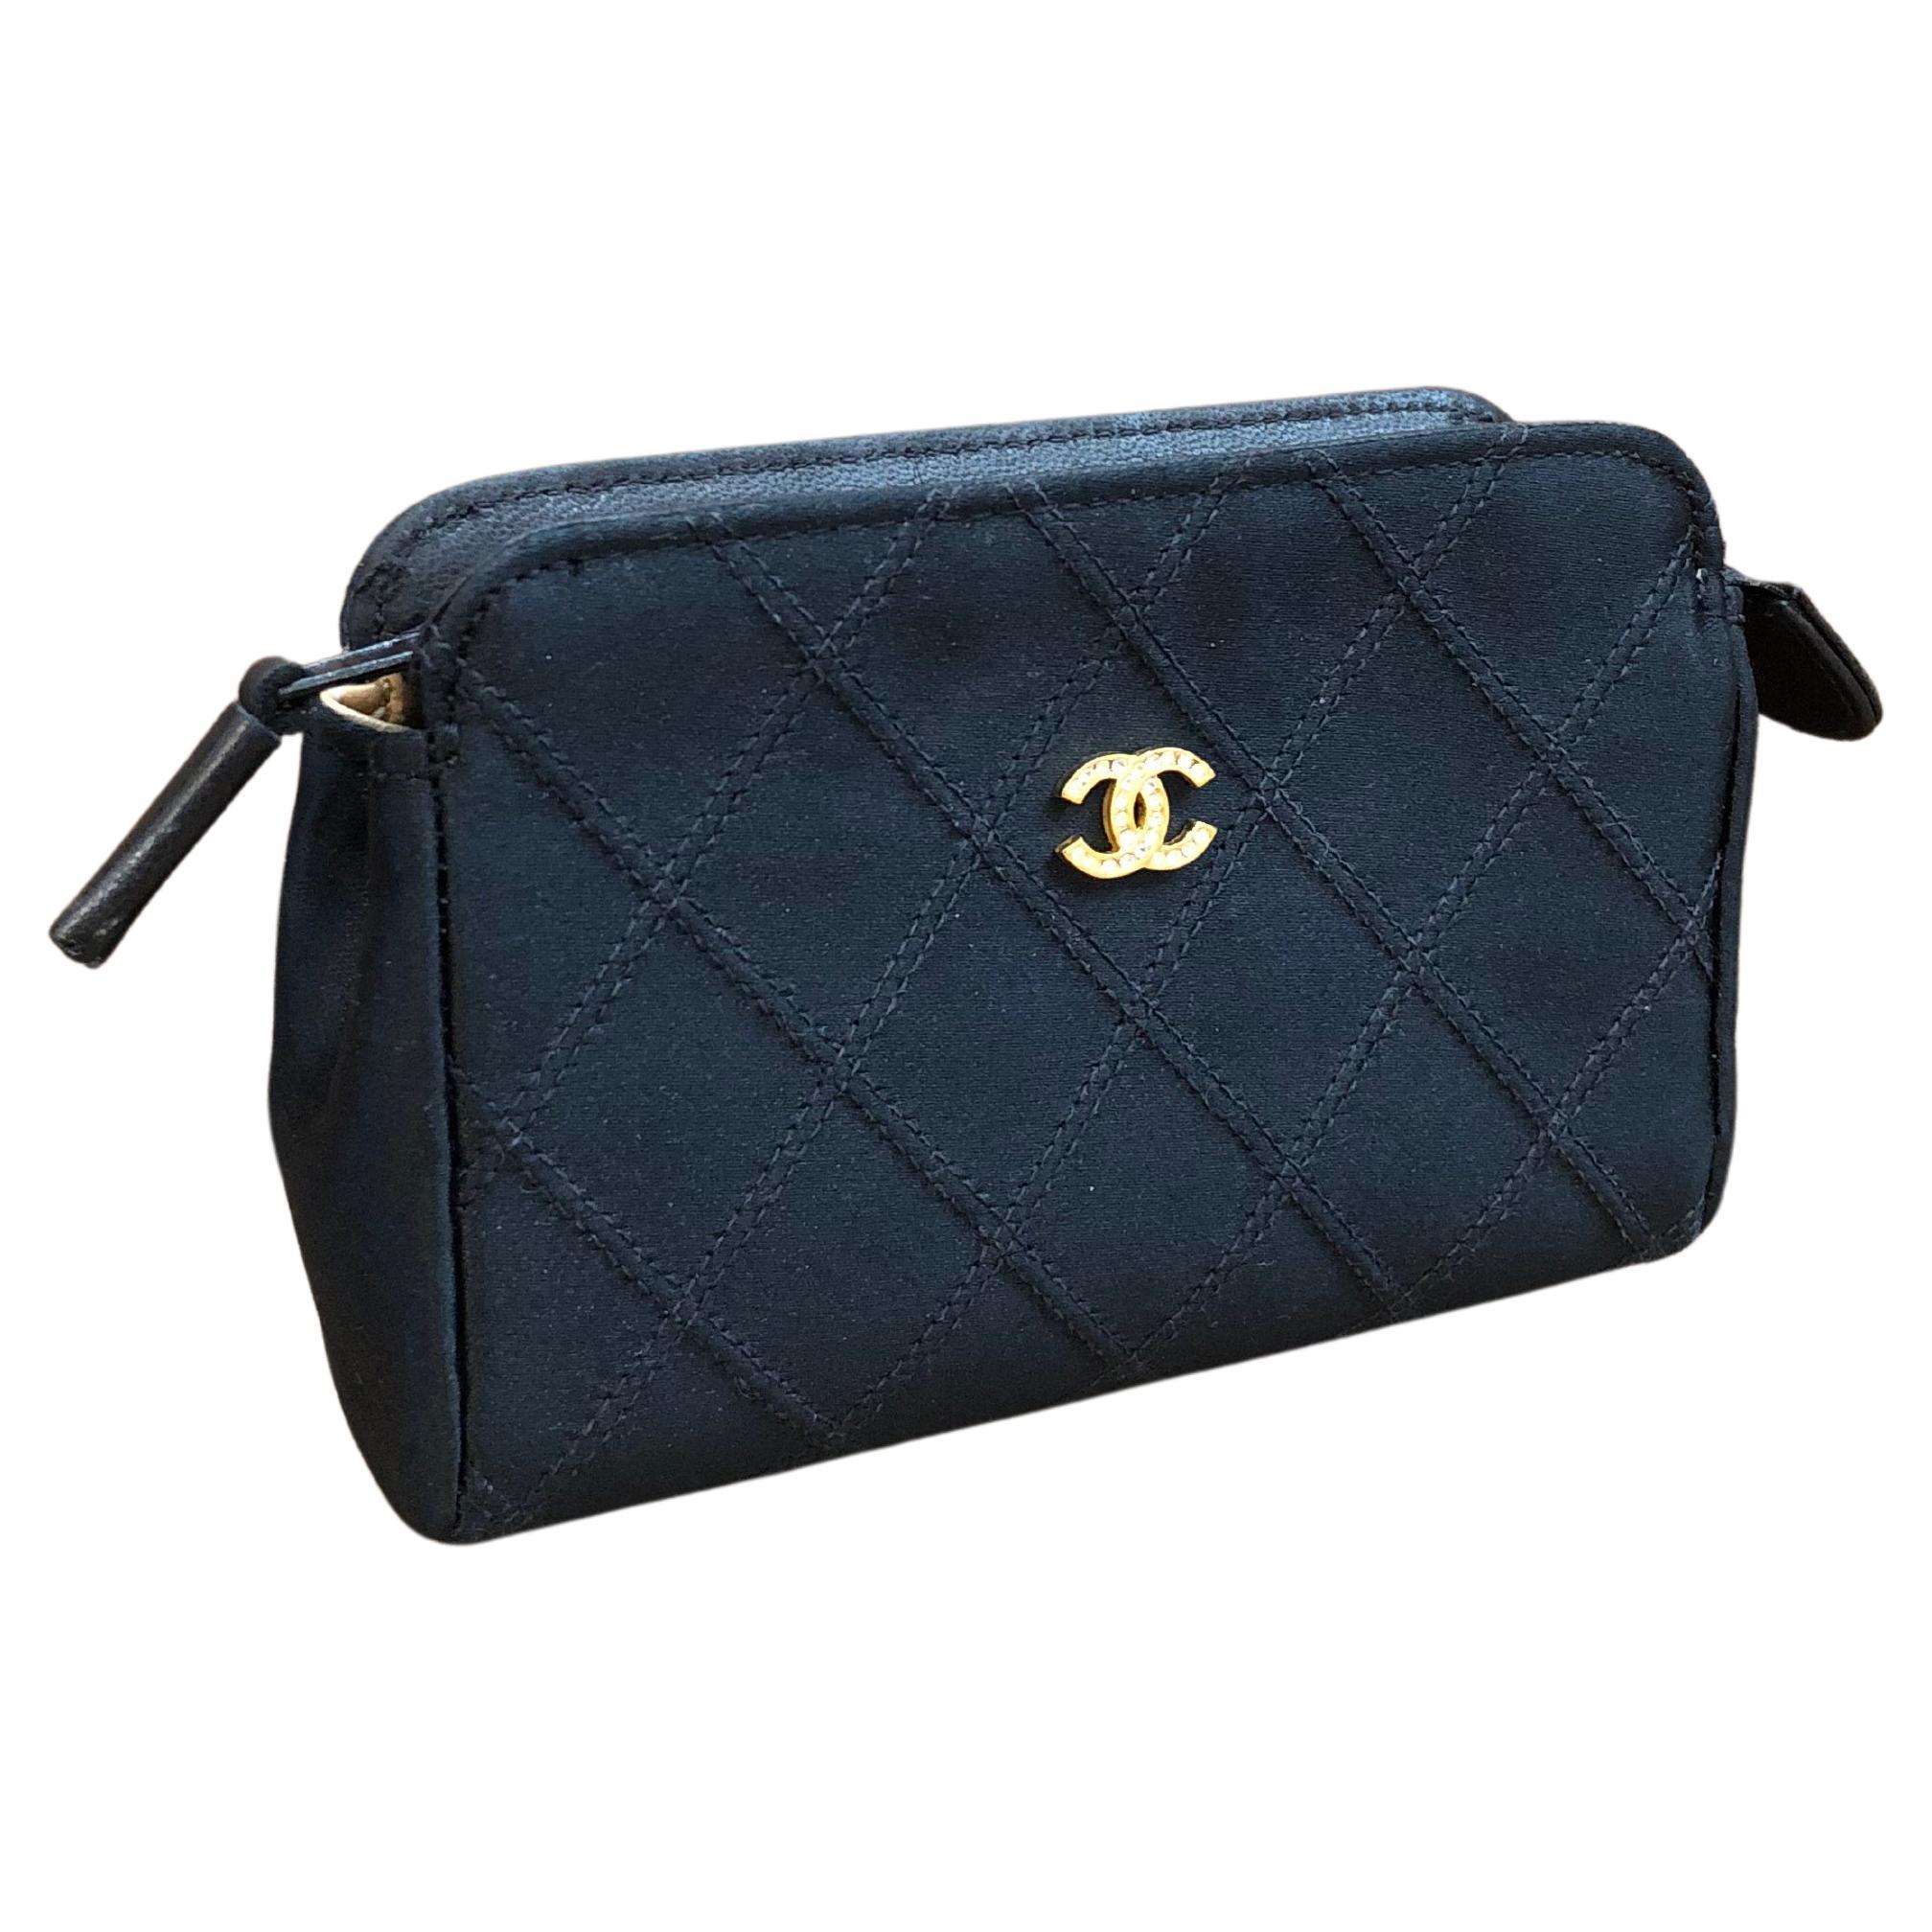 Chanel Black Quilted Lambskin Leather Mini O-Case Zip Pouch